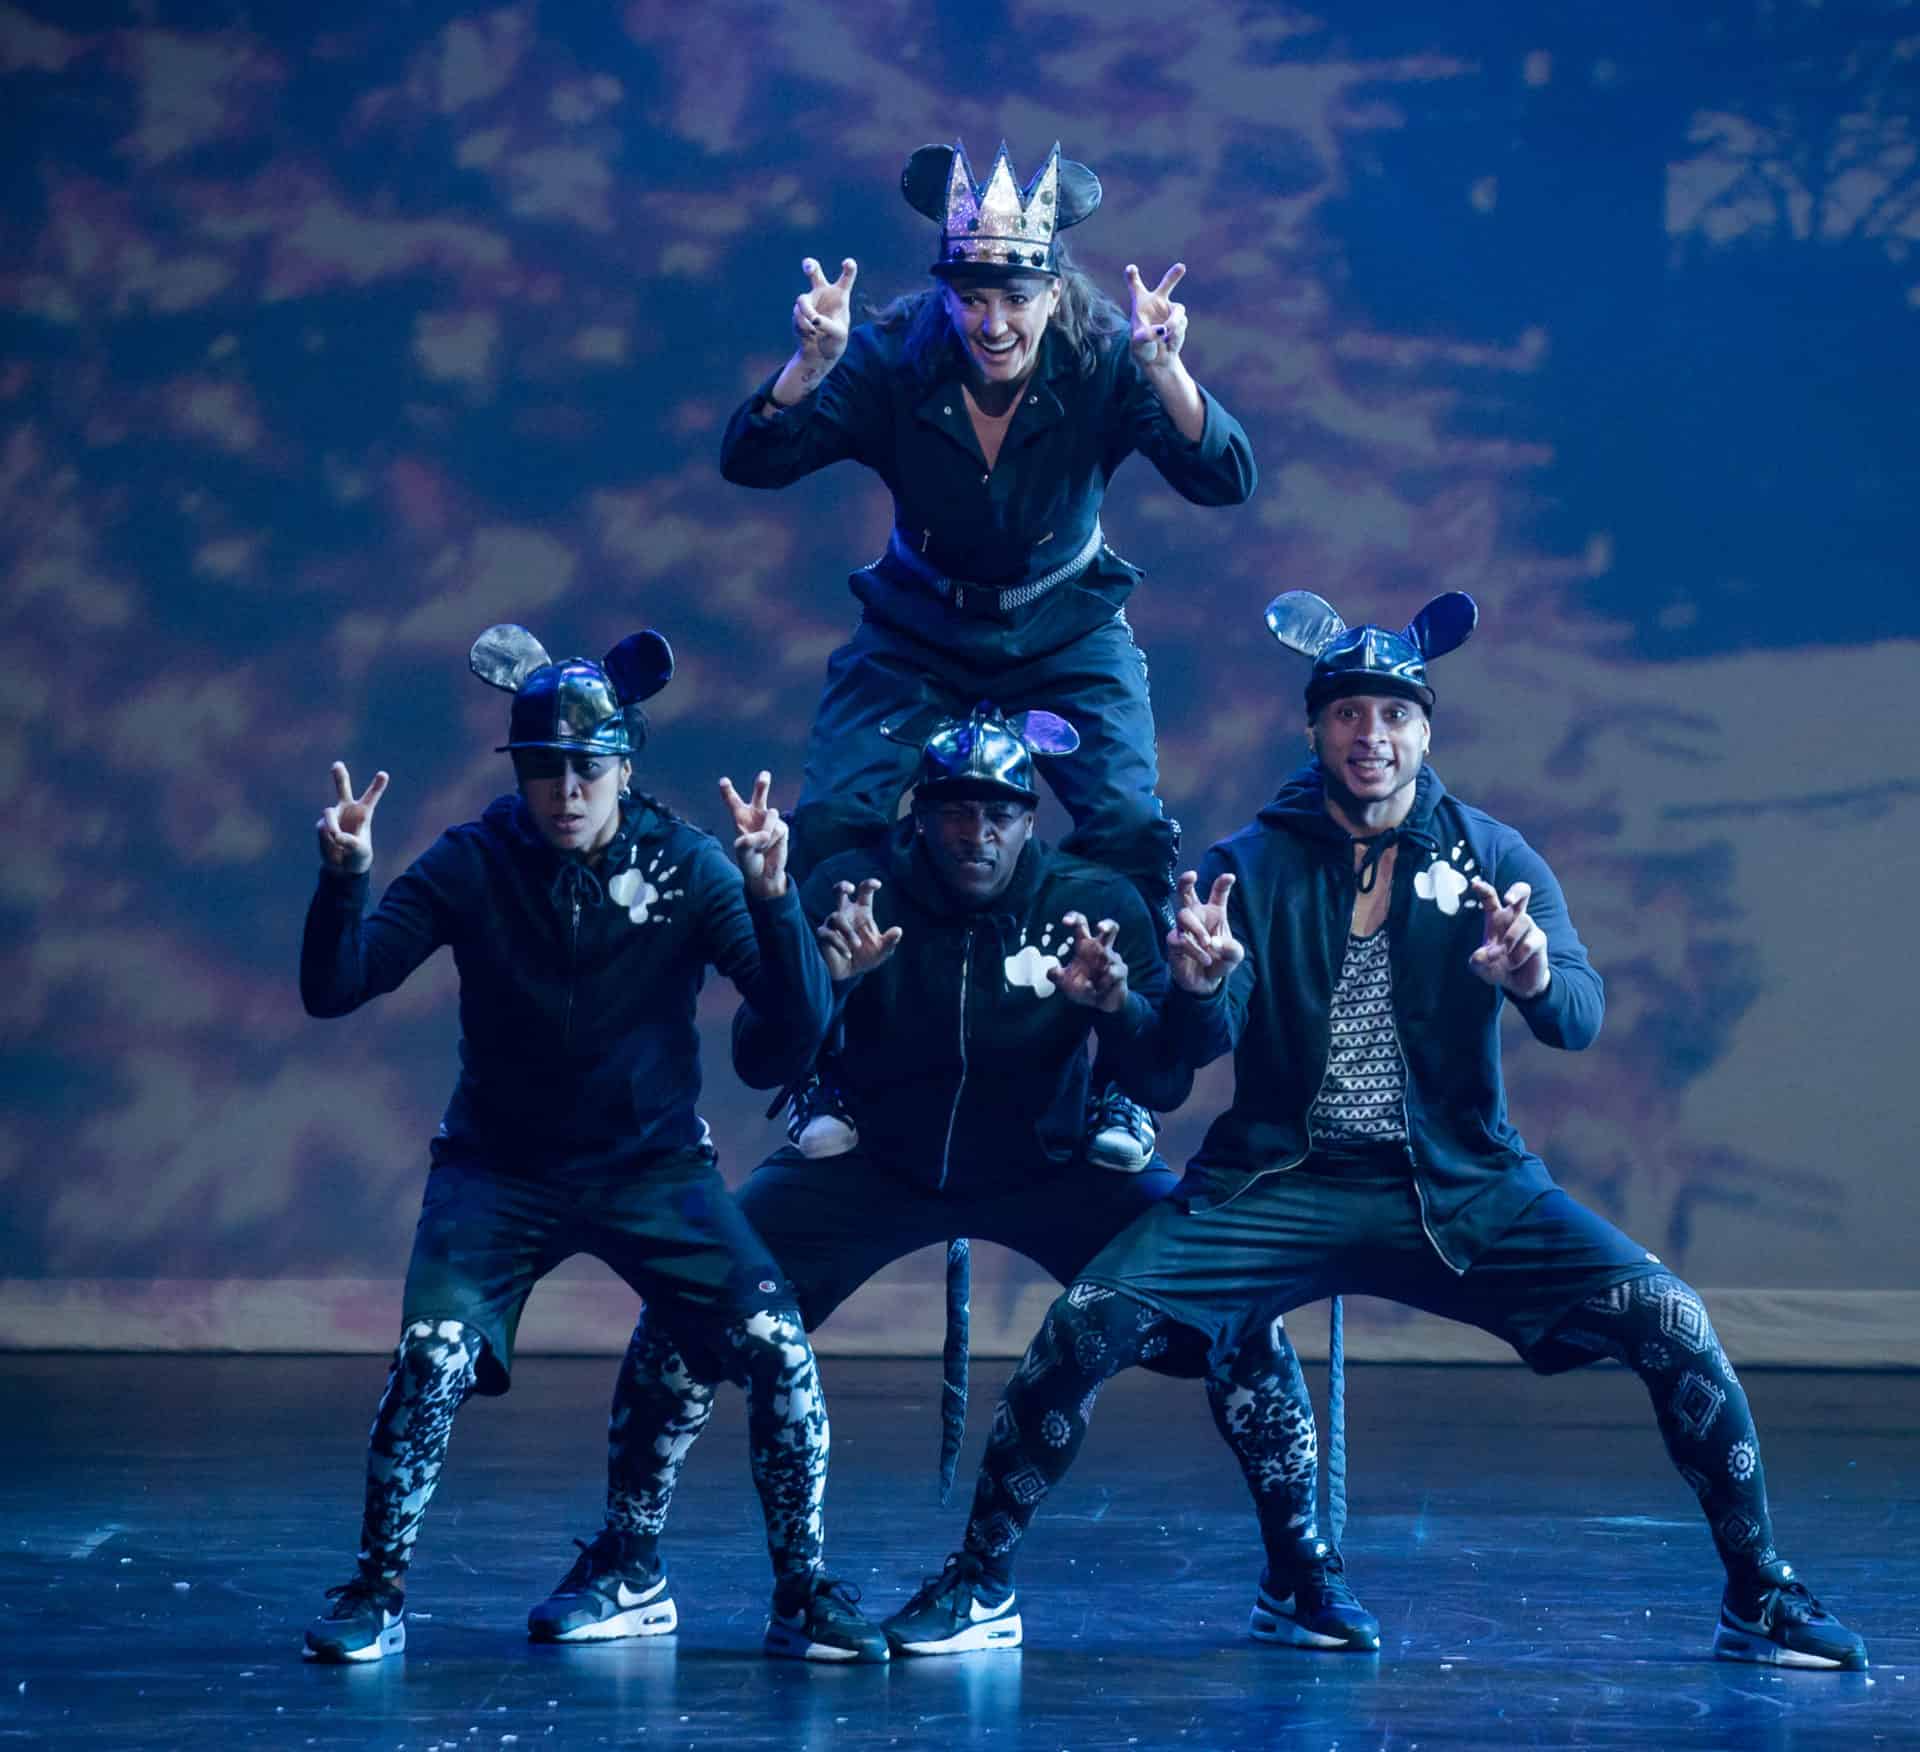 Four people stand and form a pyramid. They are all wearing rat ears on their hats and are making rat claws with their hands.